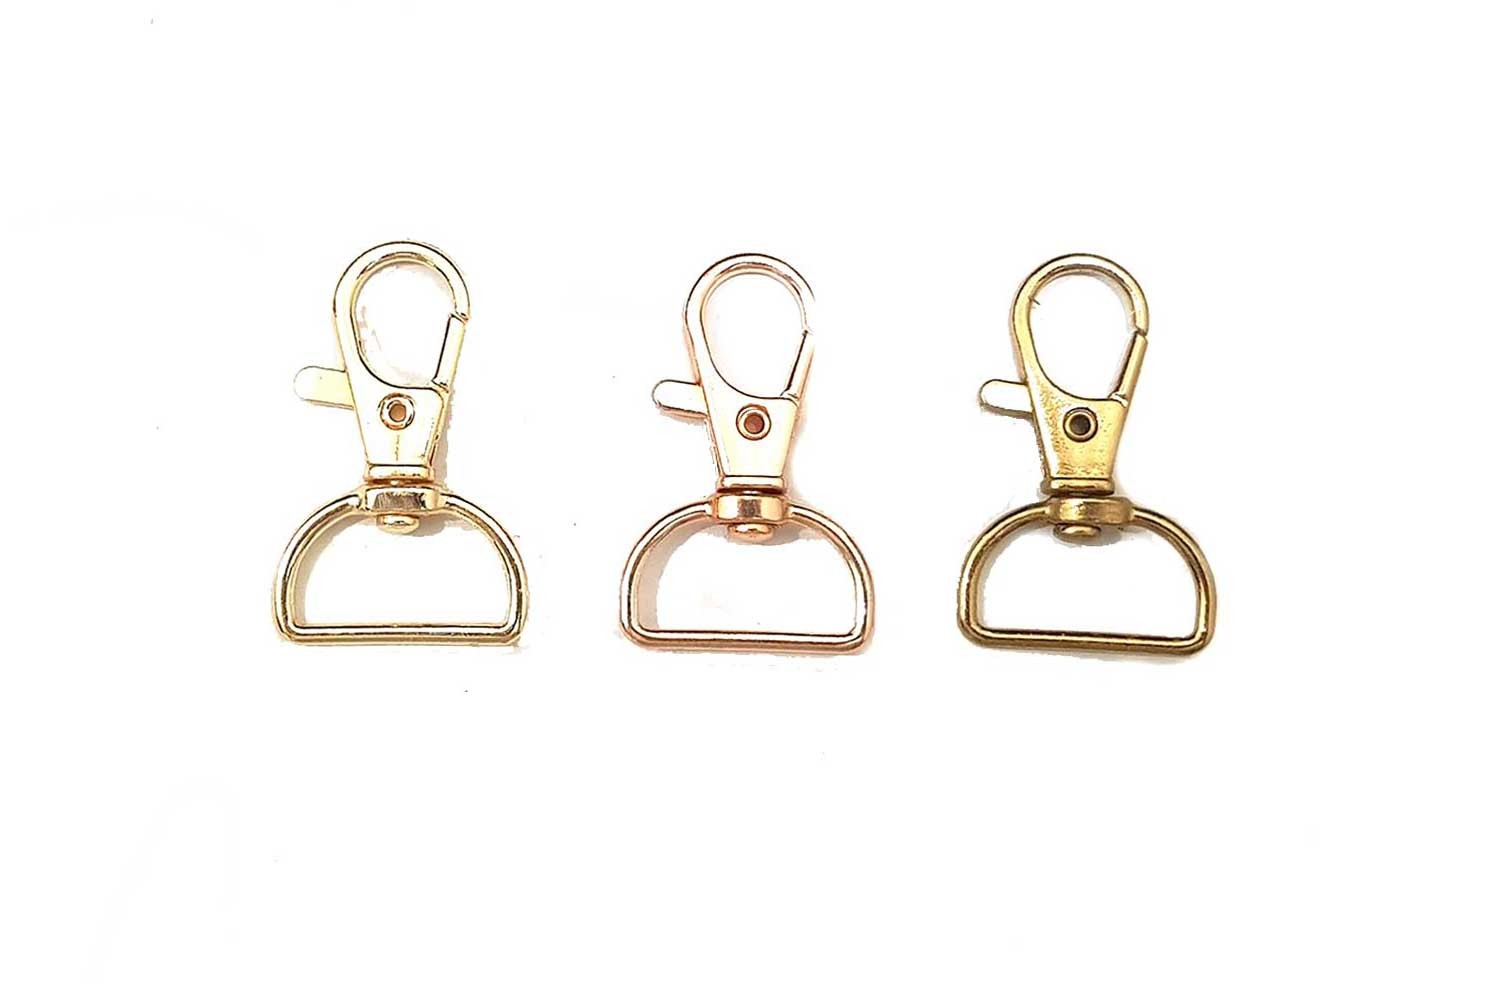 Rose Gold Lobster Clasp Swivel Hooks with D Rings webbing bag